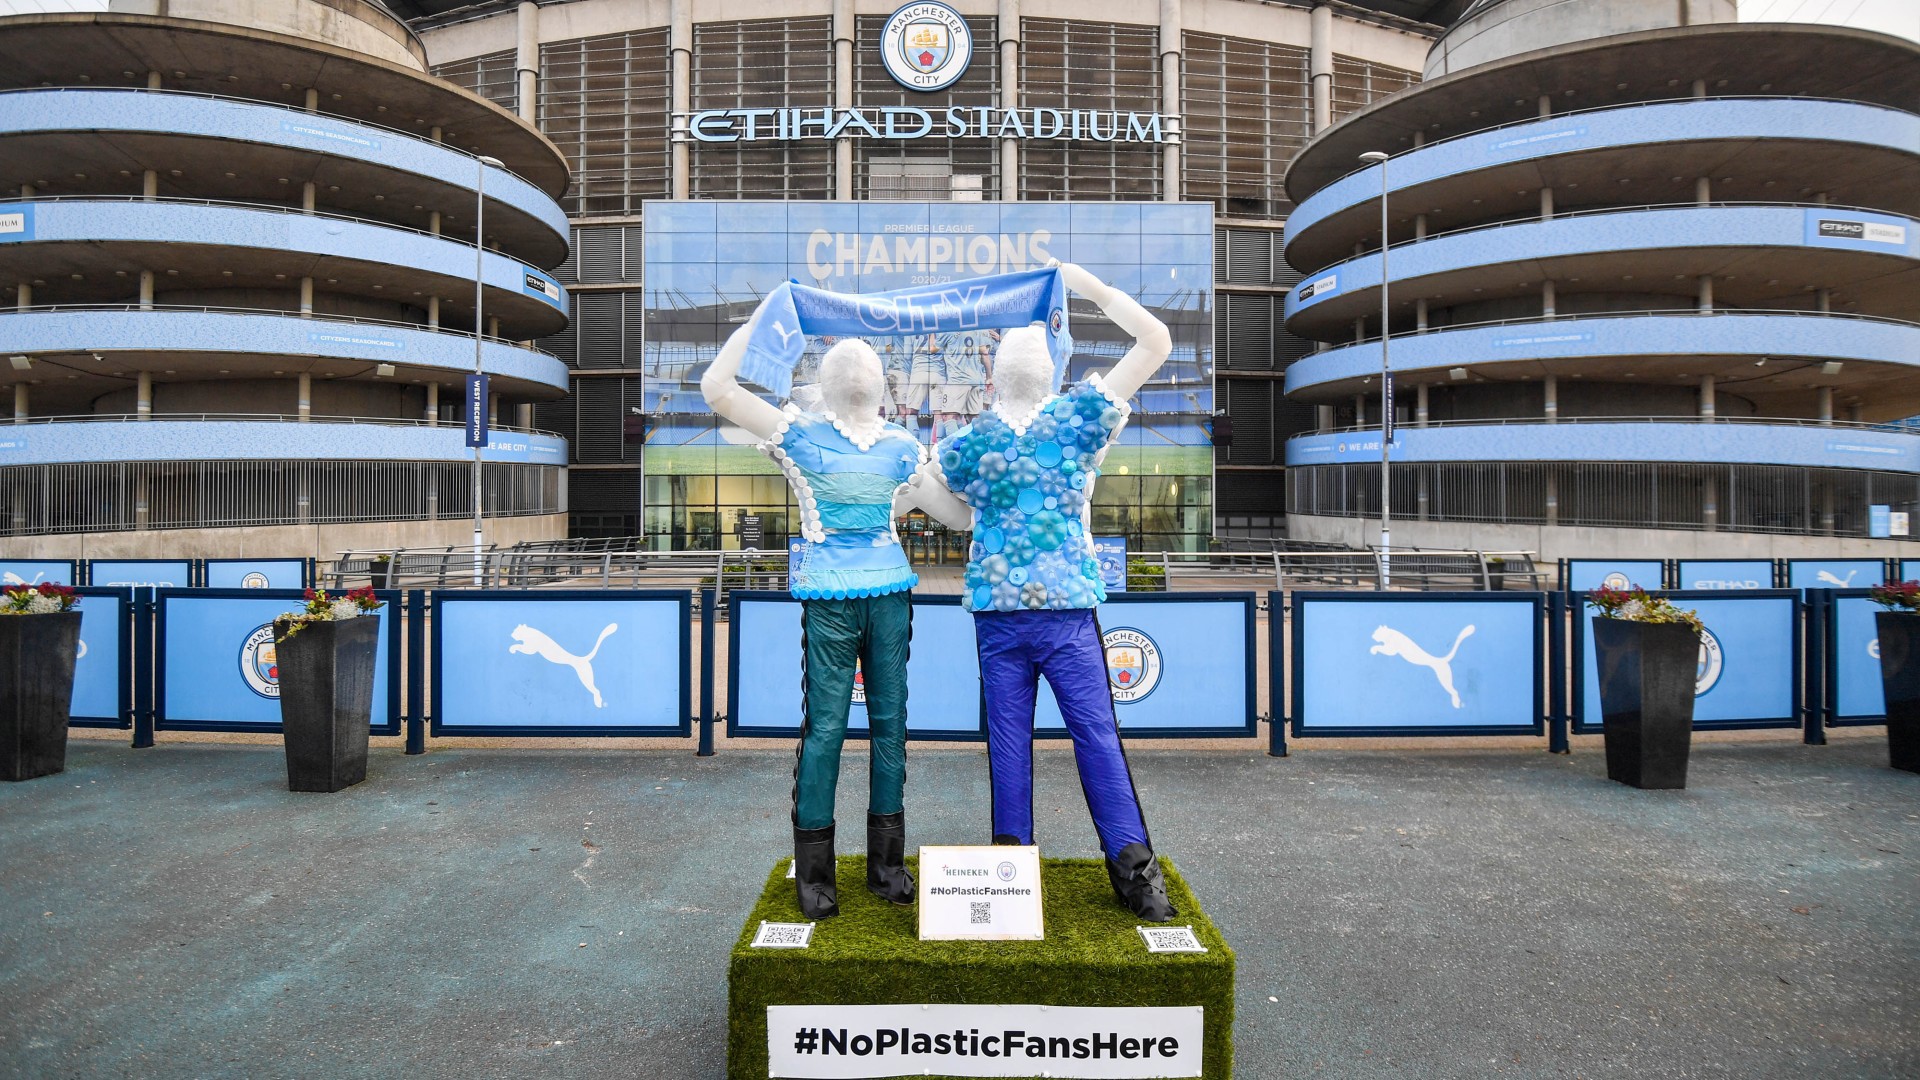 Metropolis collaborates with Heineken to take away plastic followers from soccer